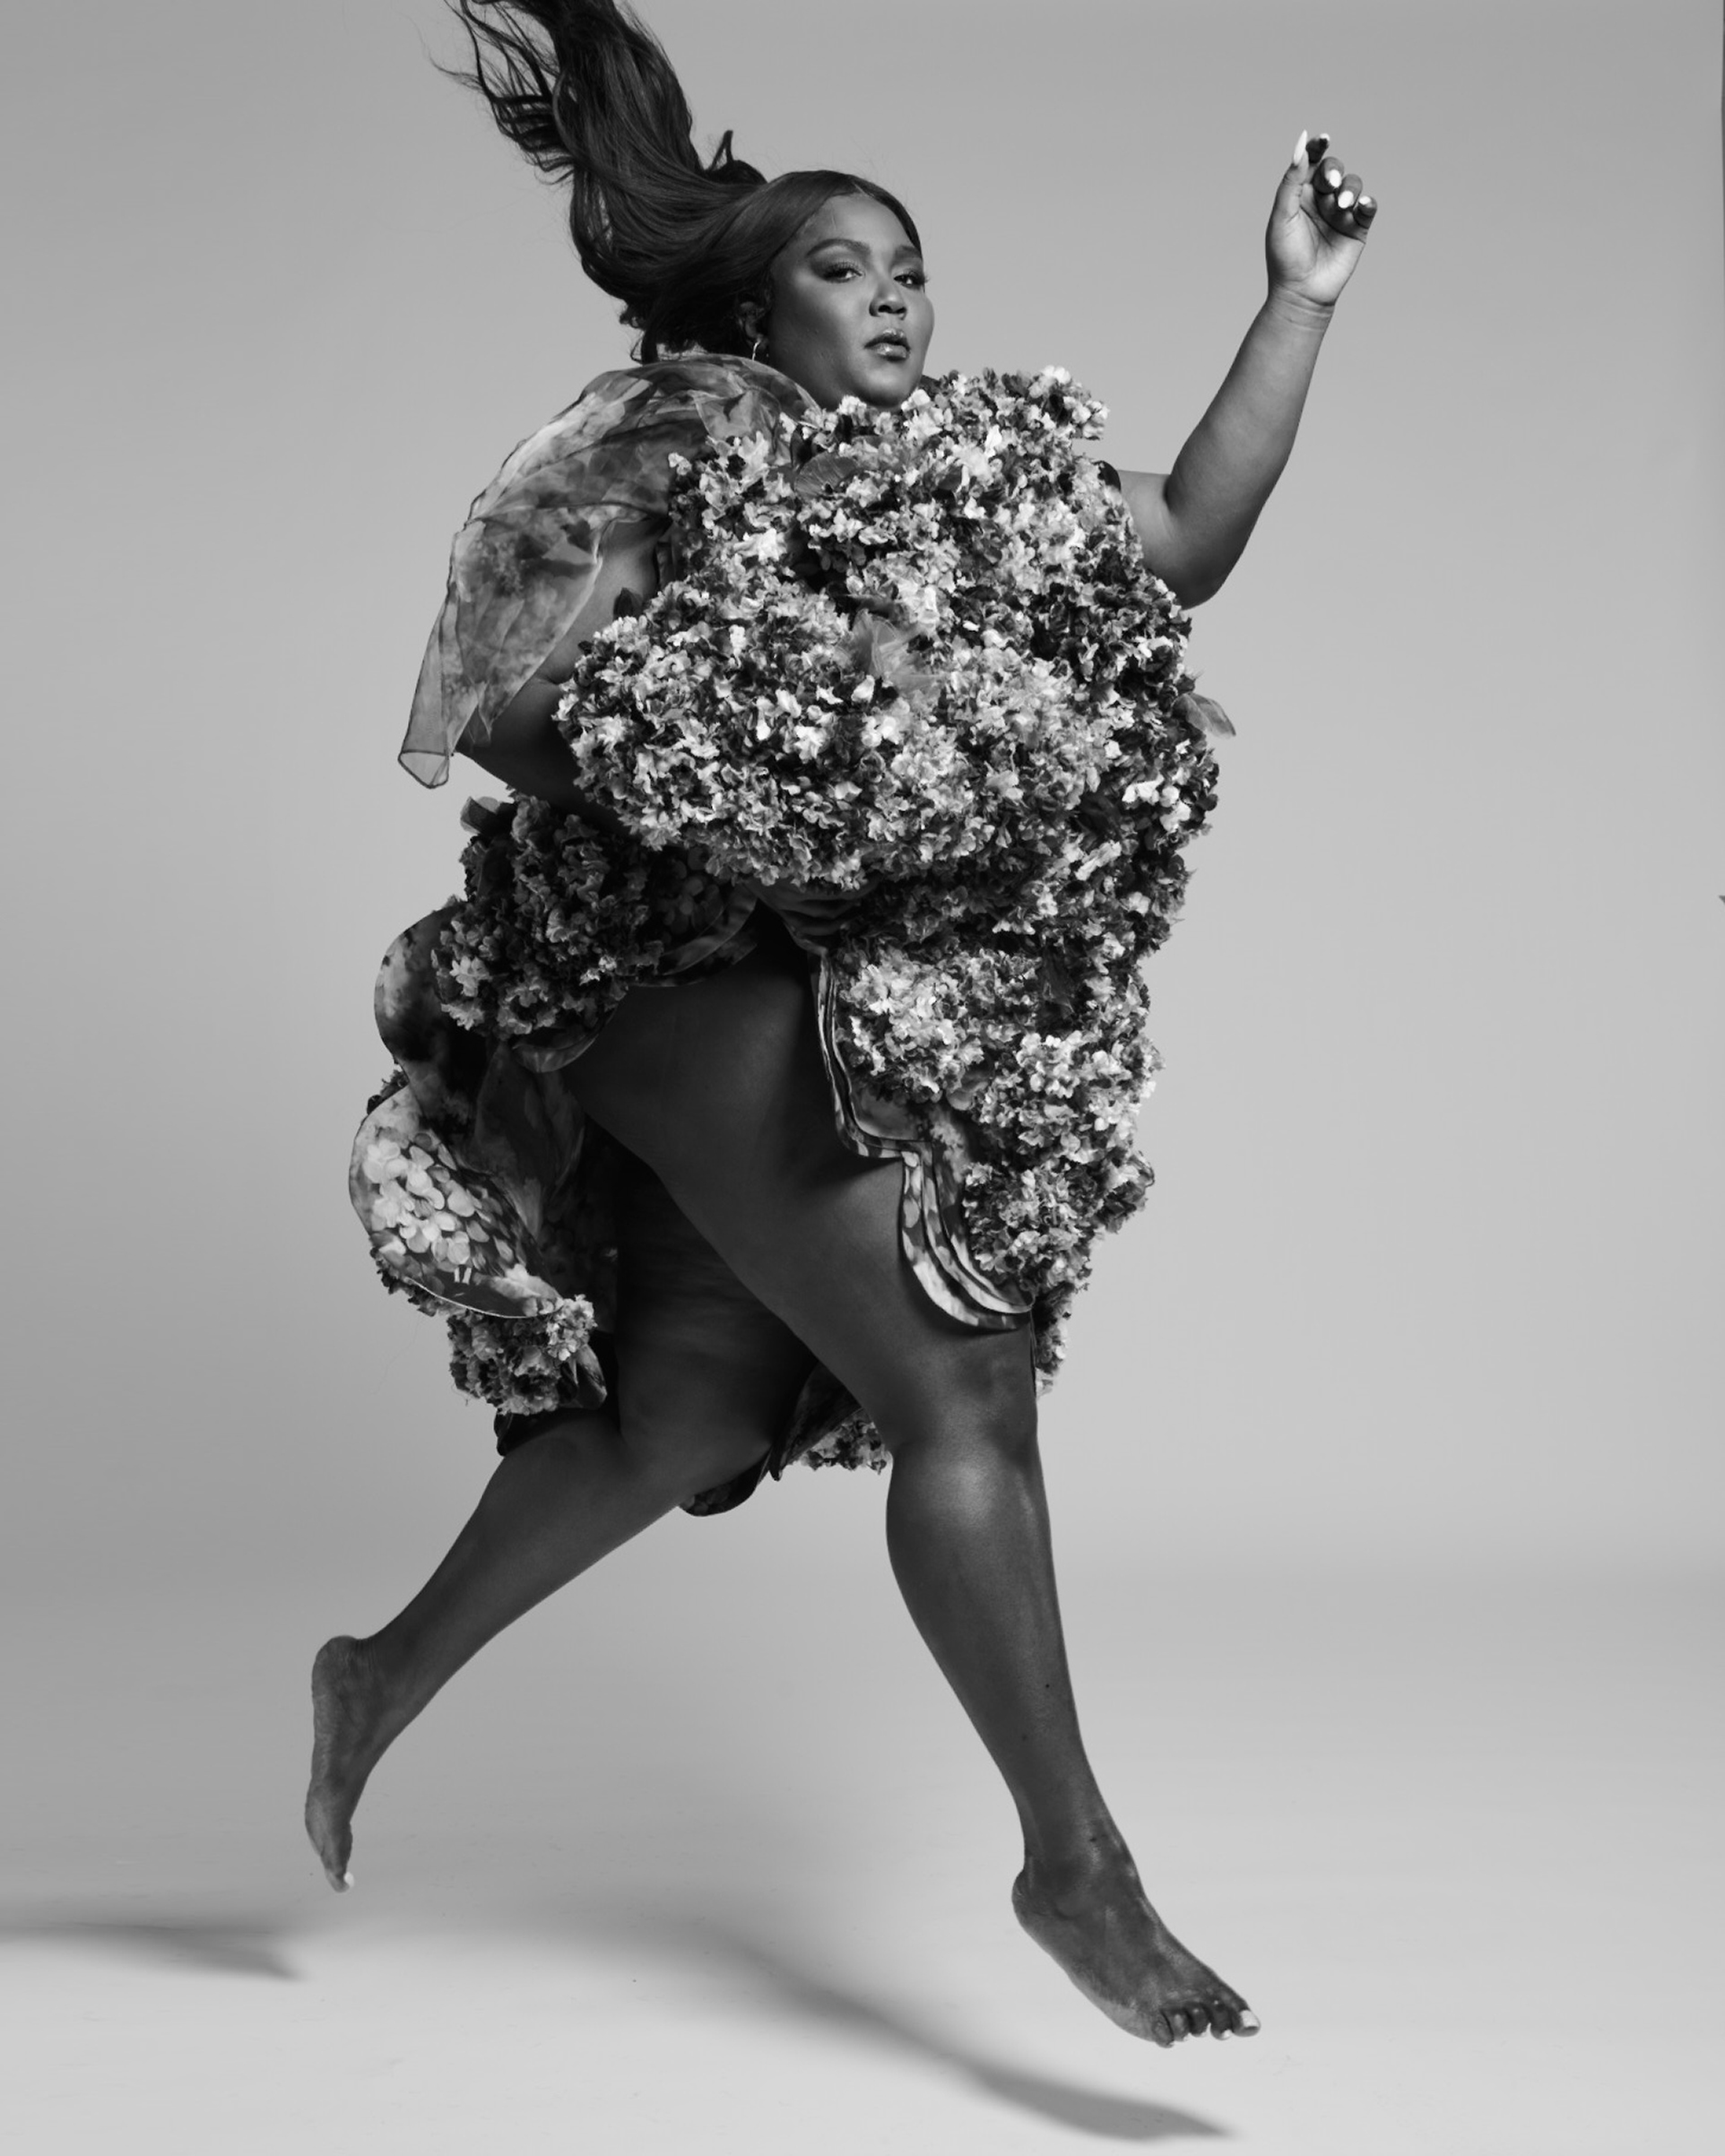 Lizzo. "Entertainer of the Year," Dec. 23 issue. (Paola Kudacki for TIME)